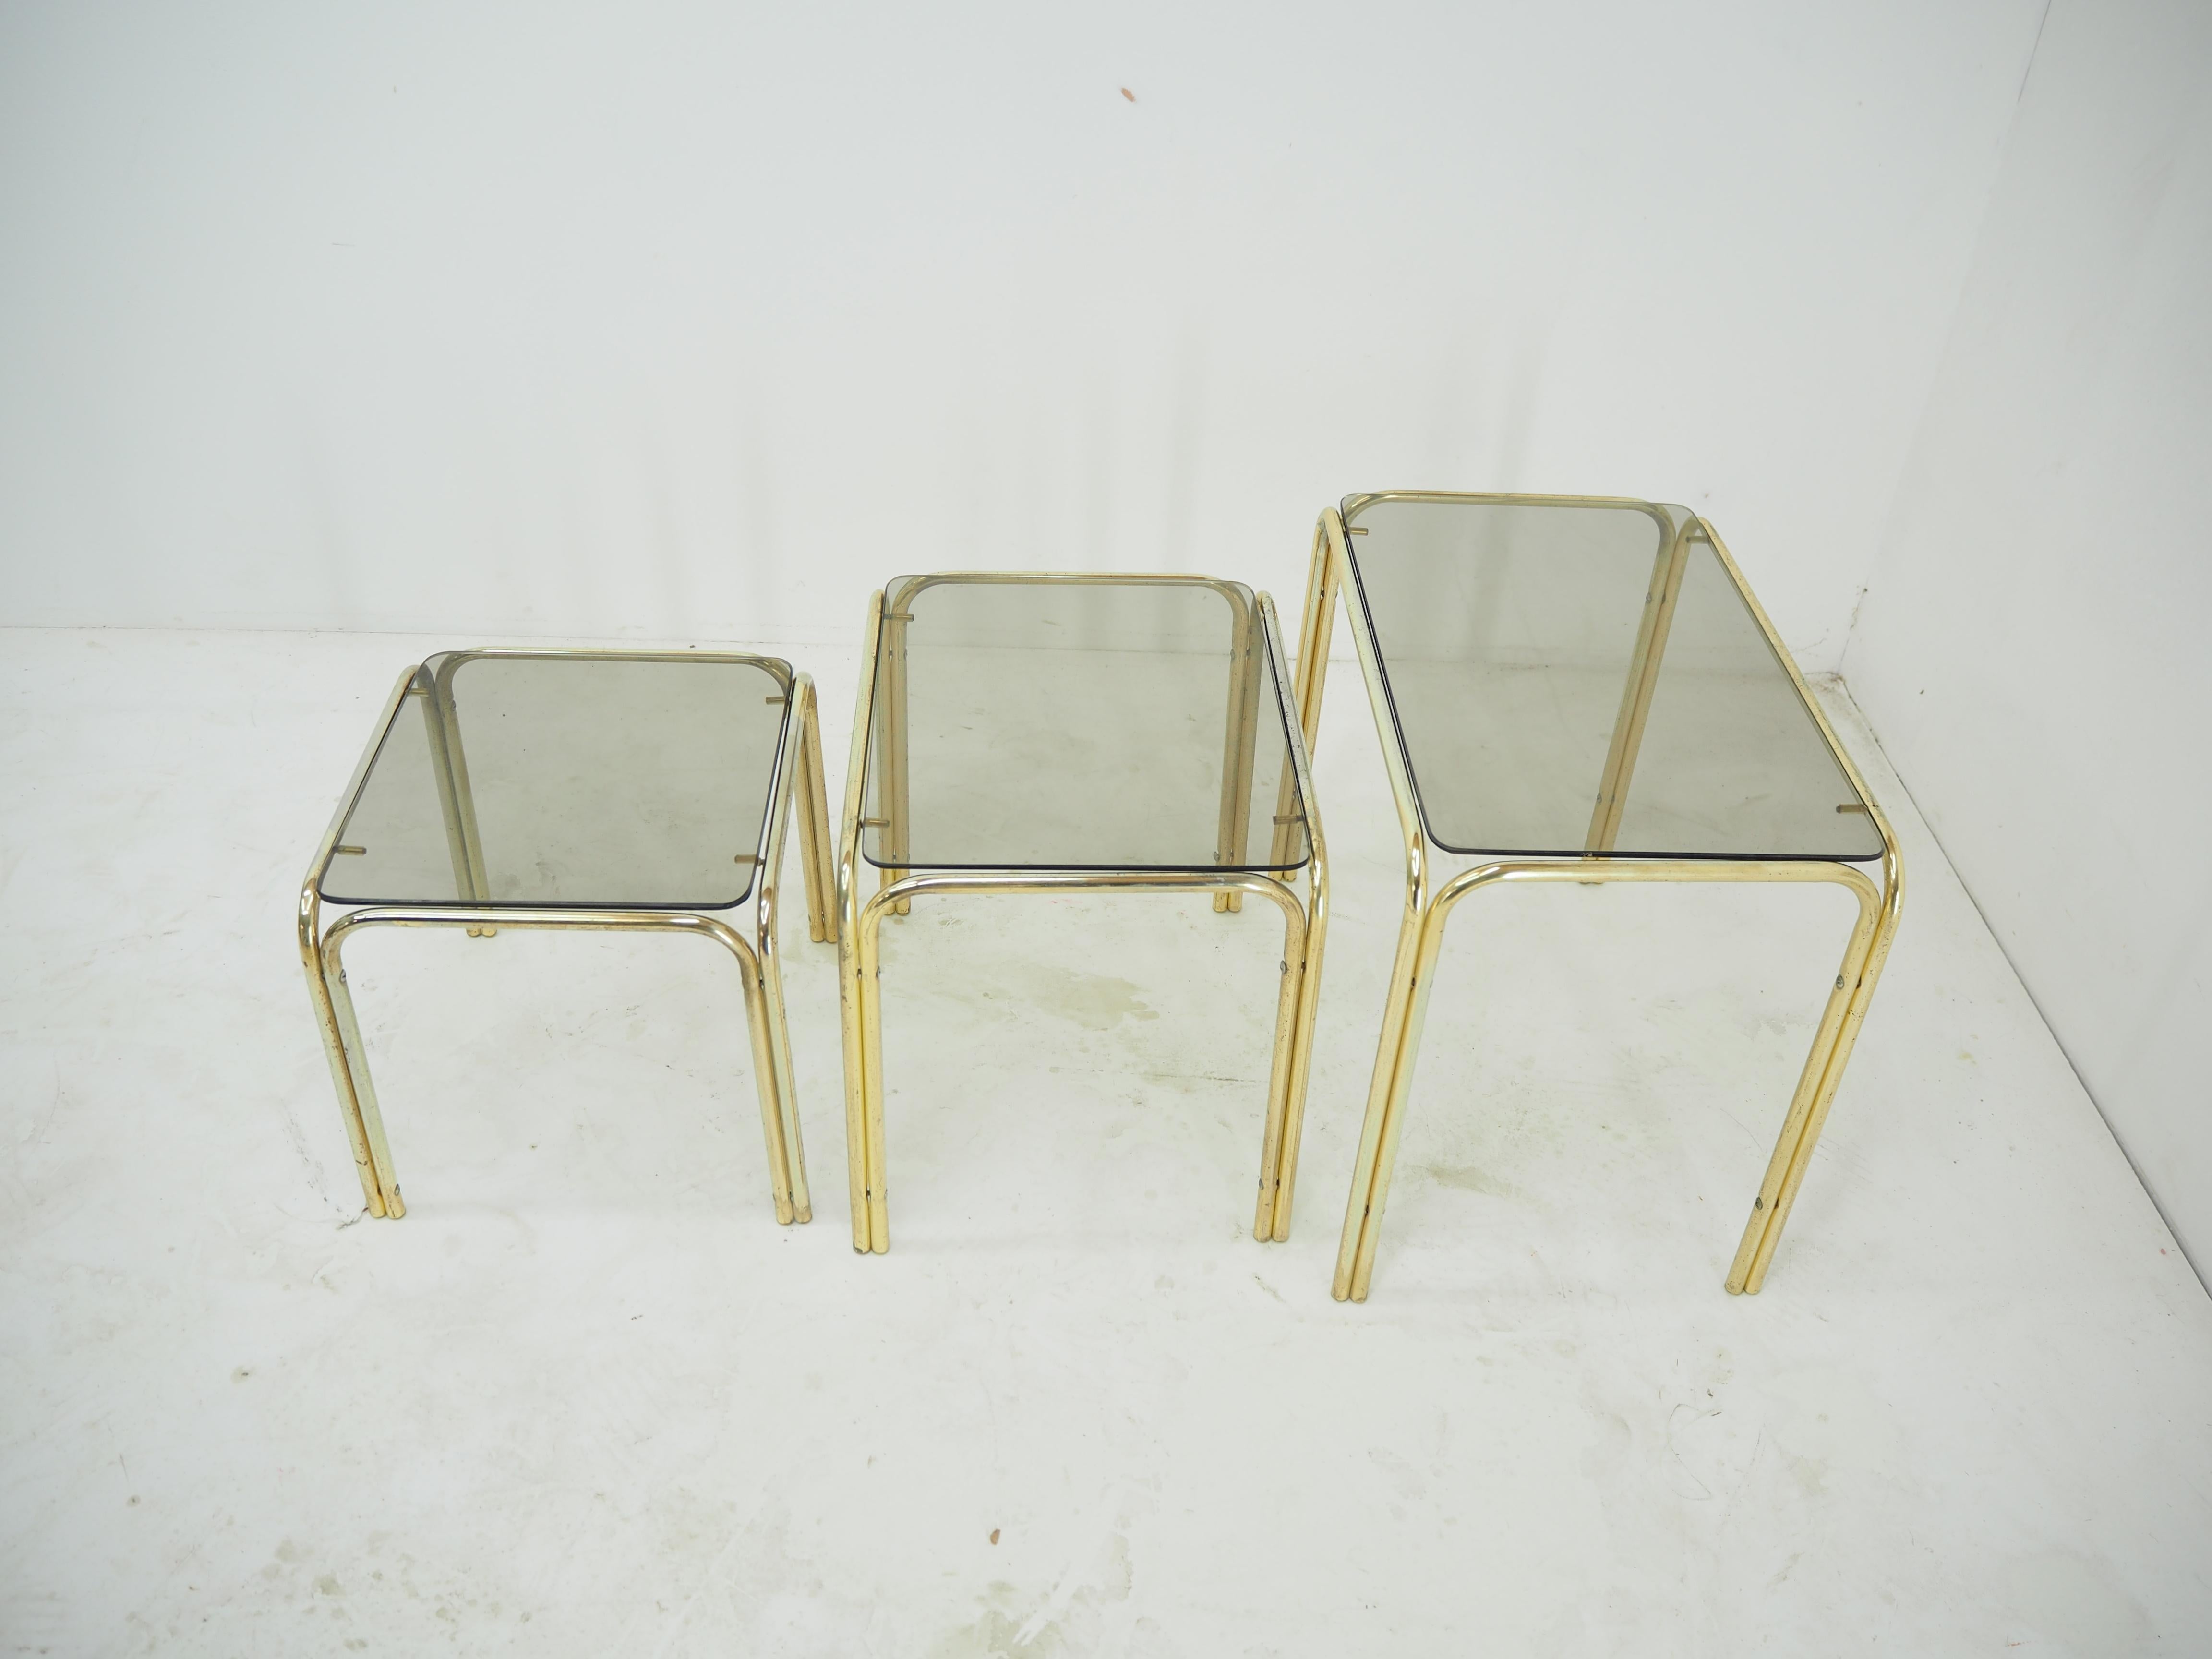 Italian Midcentury Brass & Smoked Glass Nesting Tables, 1970s For Sale